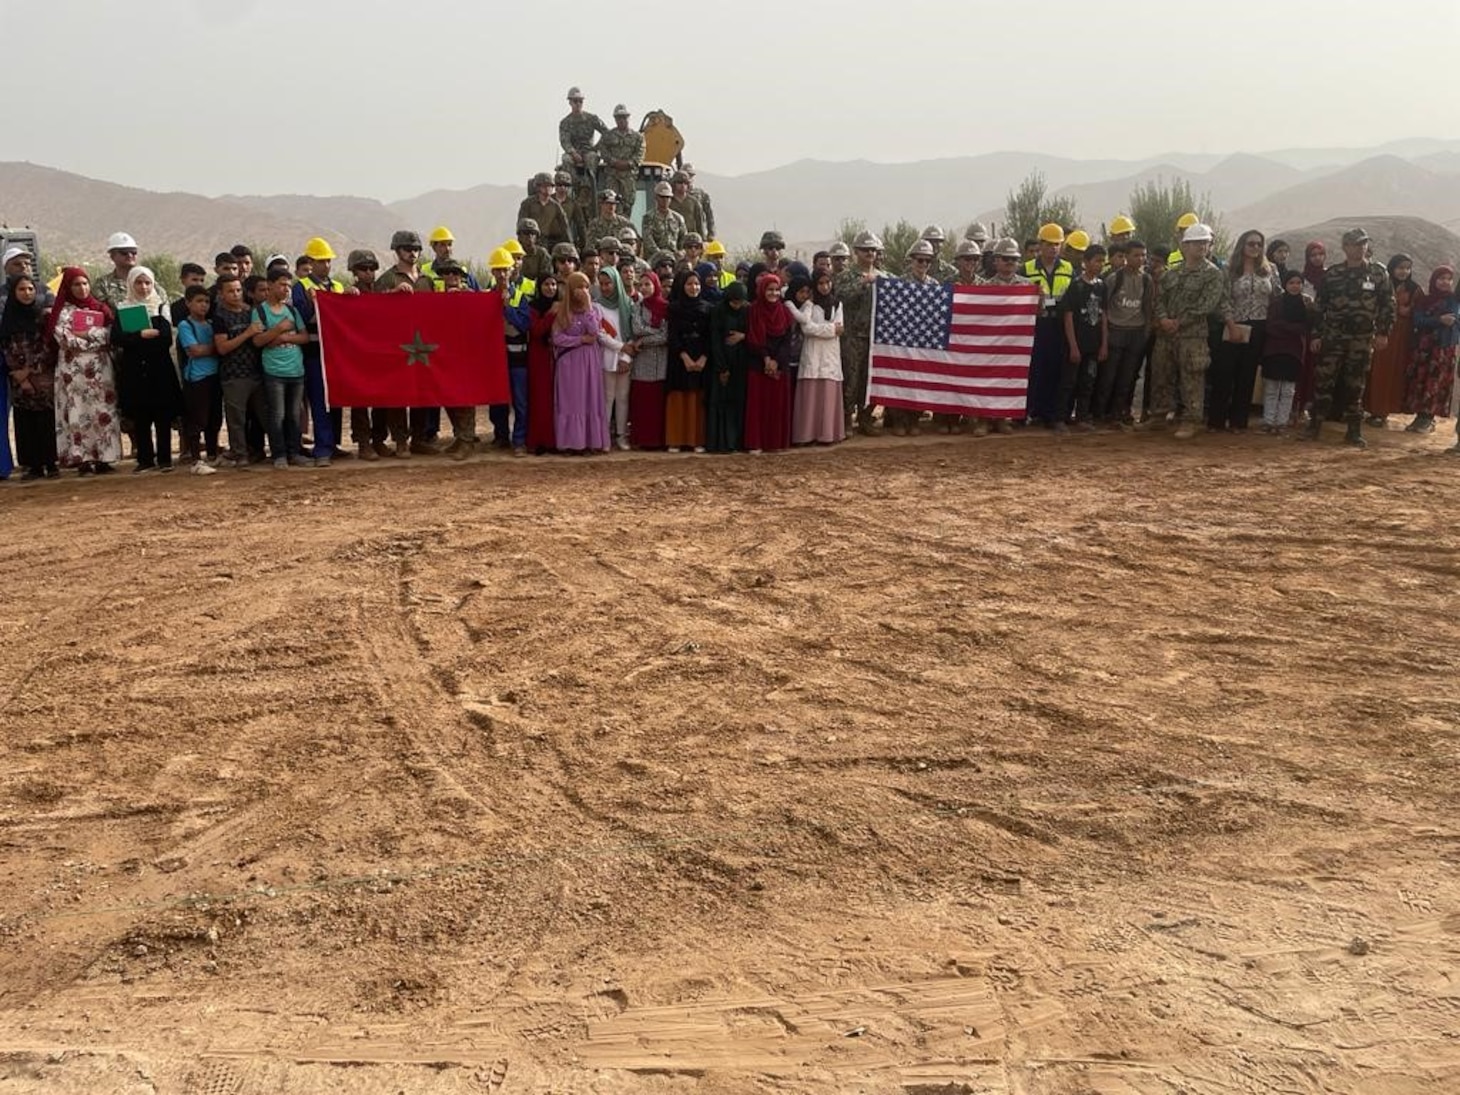 U.S. Navy Seabees, assigned to Naval Mobile Construction Battalion (NMCB) 133, U.S. Marine Corps engineers from 8th Engineer Support Battalion (ESB), Royal Moroccan Army engineers, and distinguished visitors break ground on an Engineer Civic Action Project (ENCAP) during exercise African Lion 2022 (AL22) in Taliouine, Morocco, June 22, 2022.